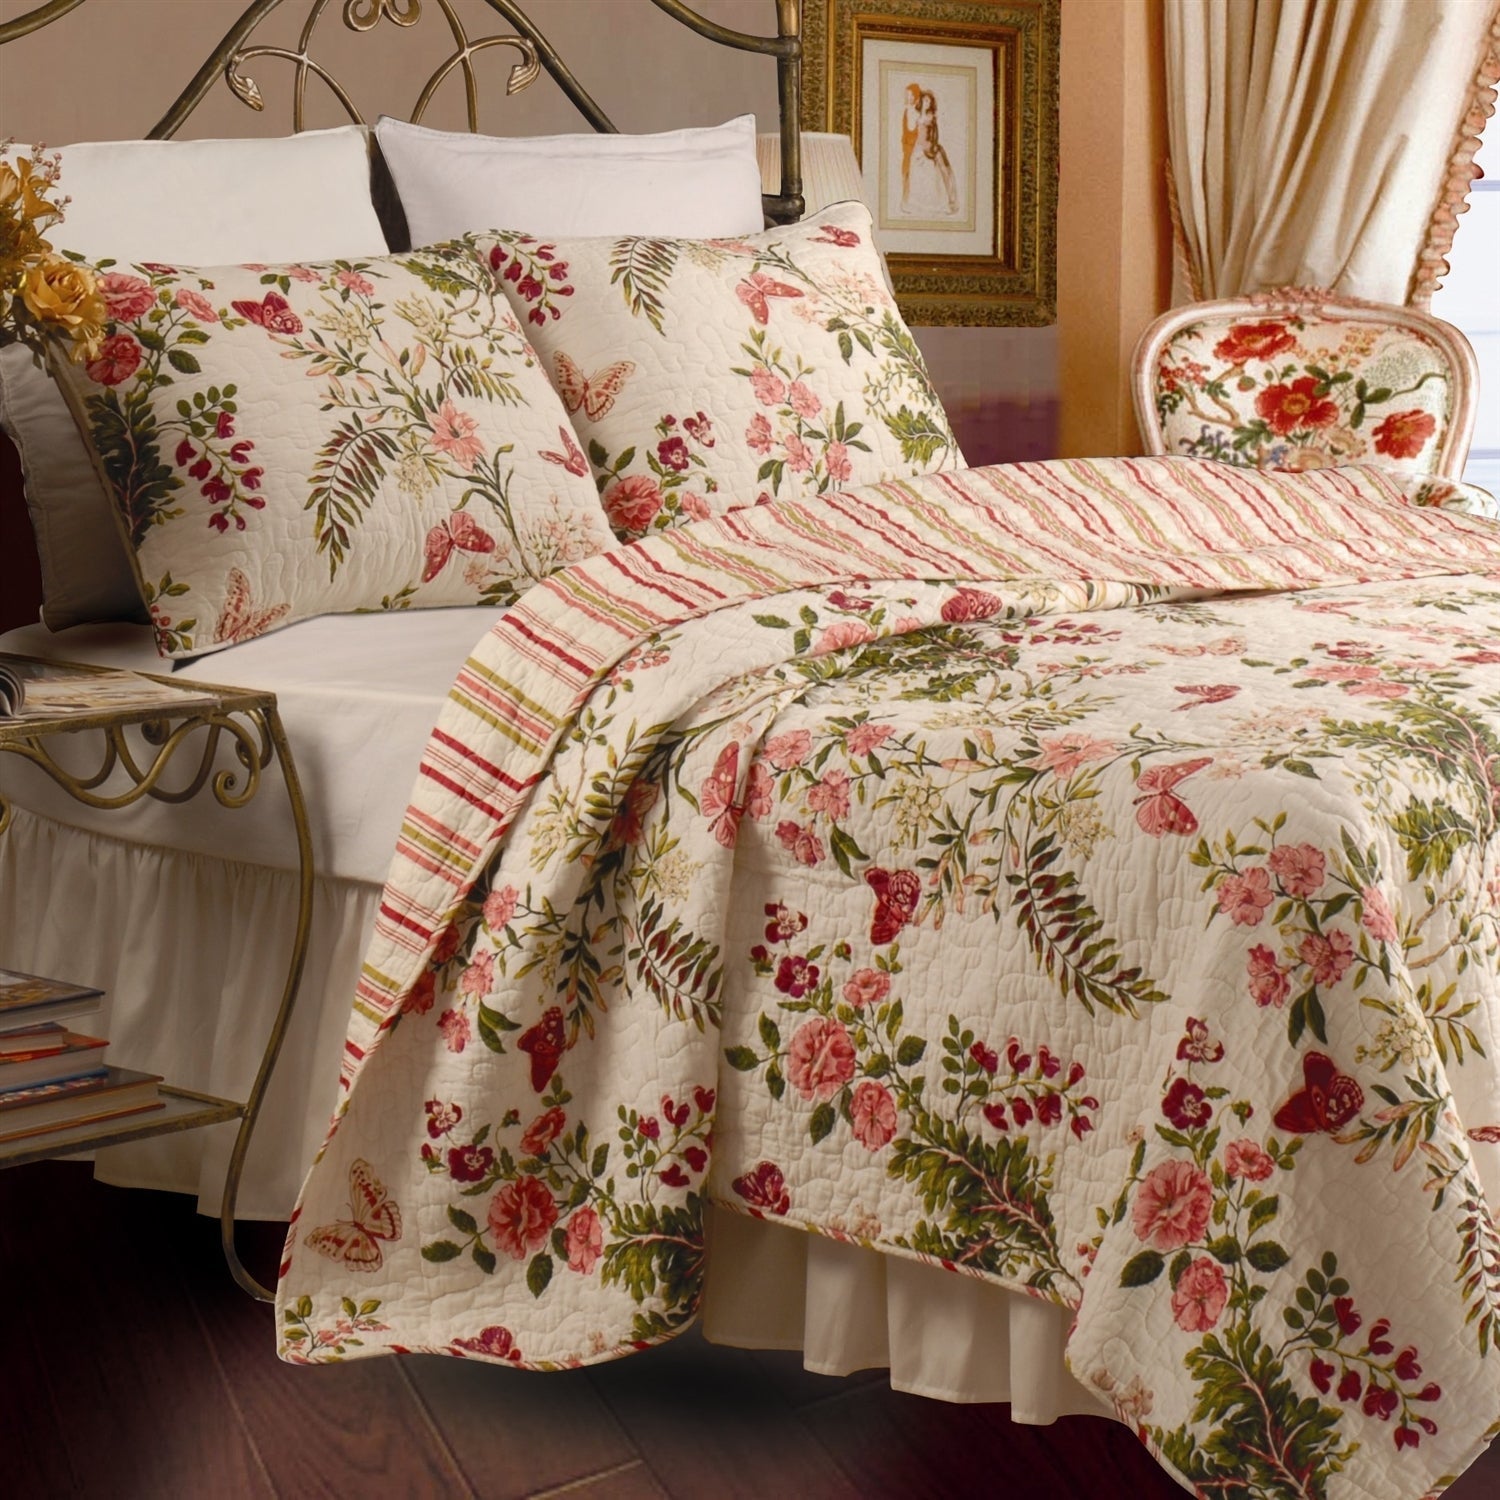 Bedroom > Quilts & Blankets - Twin Size 100% Cotton Quilt Set With Sham In Pink Floral Butterfly